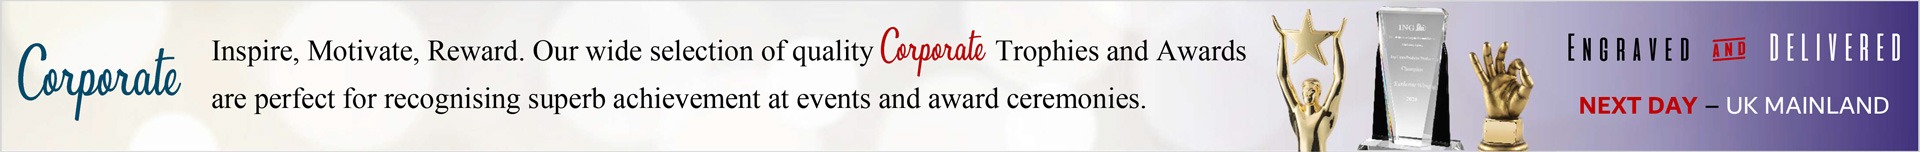 Corporate-Banner